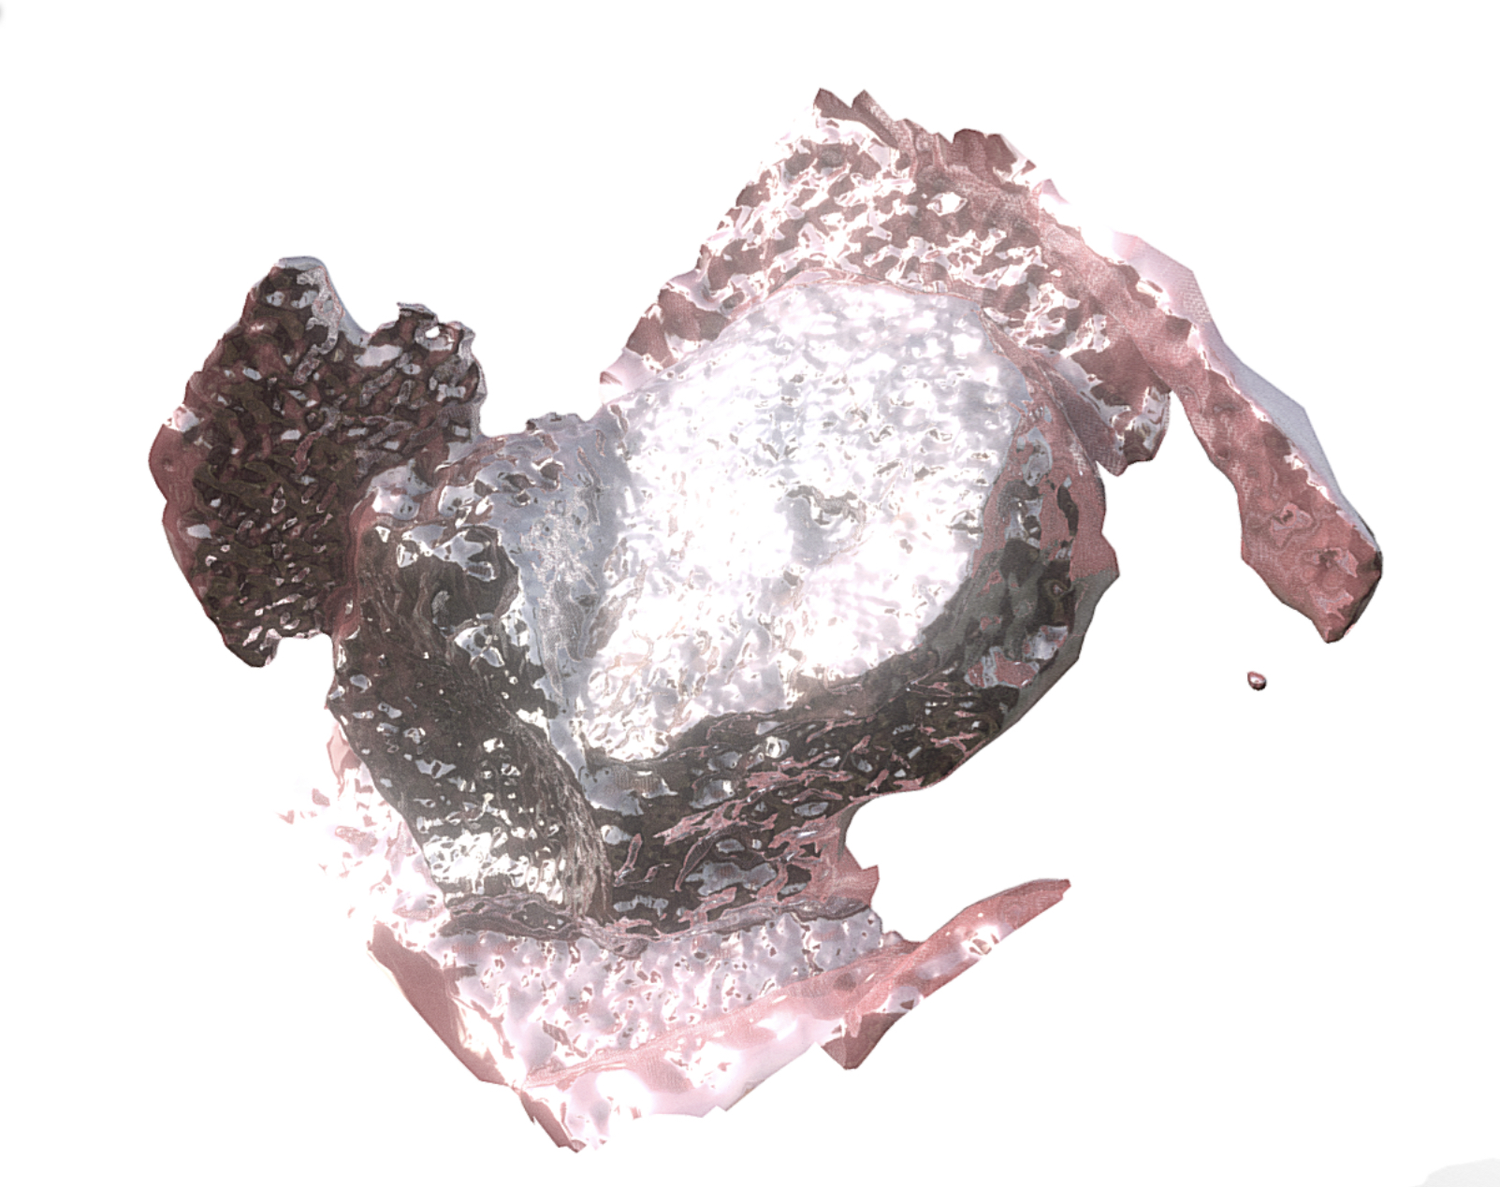 Digital sculpture showing glossy pink abstracted shape 